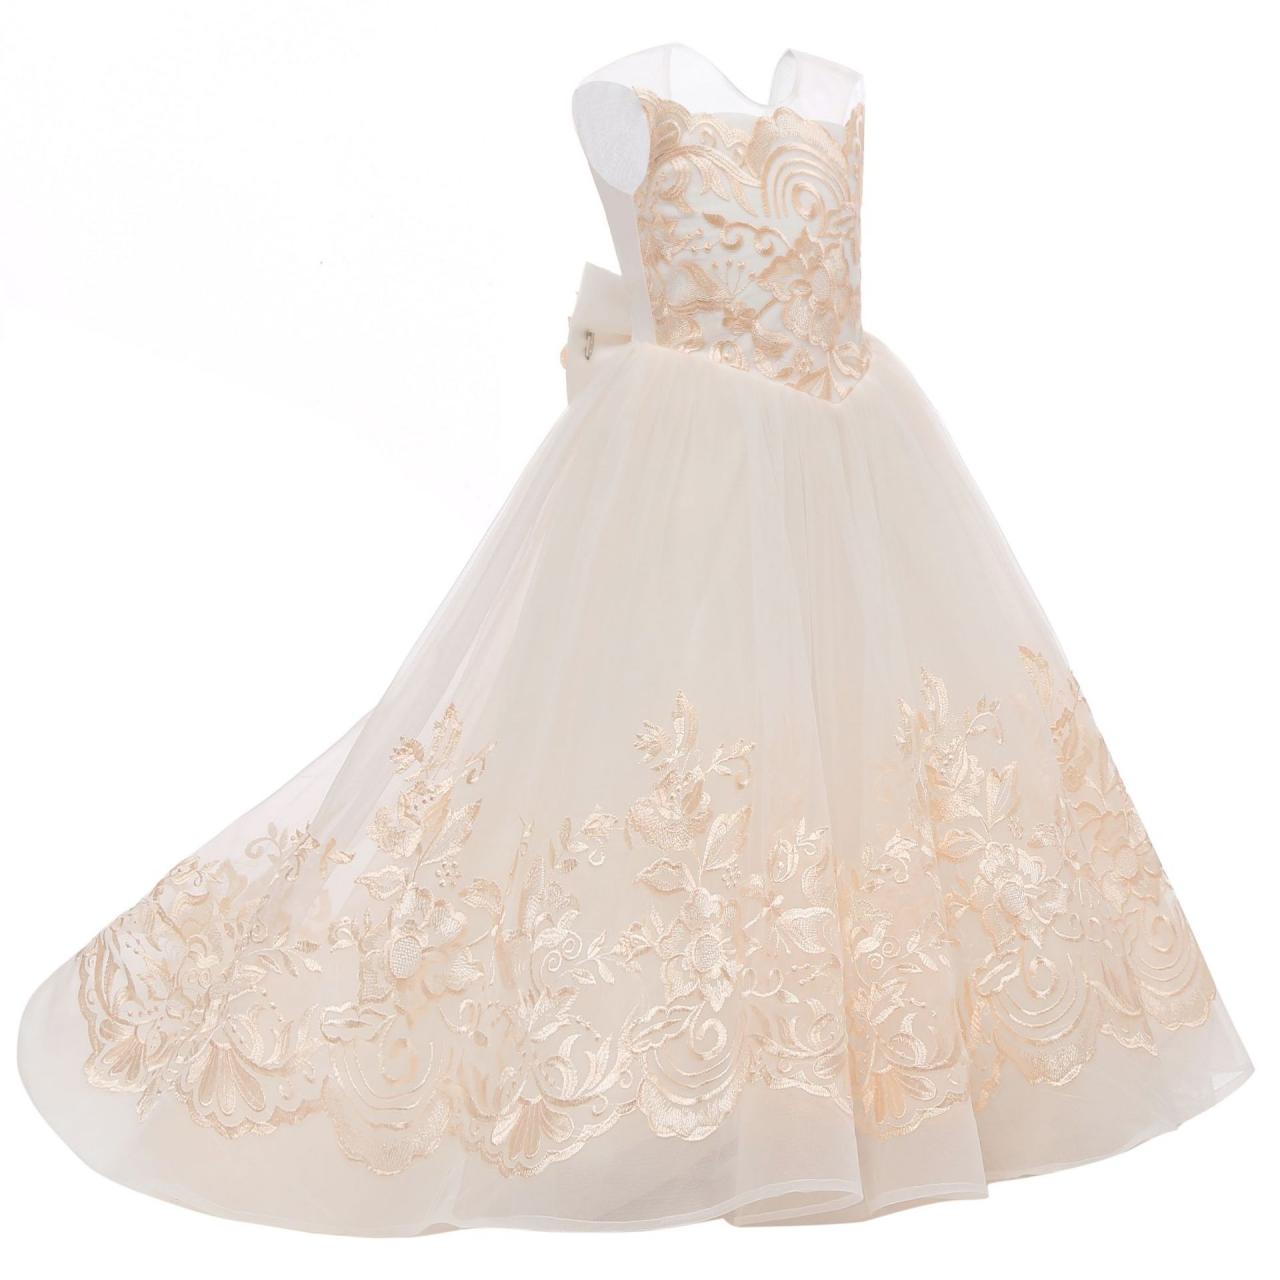 Long Champagne Flower Girl Dress with Bow Knot 2021 A Line Formal Wedding Party Dress for Kids Toddlers